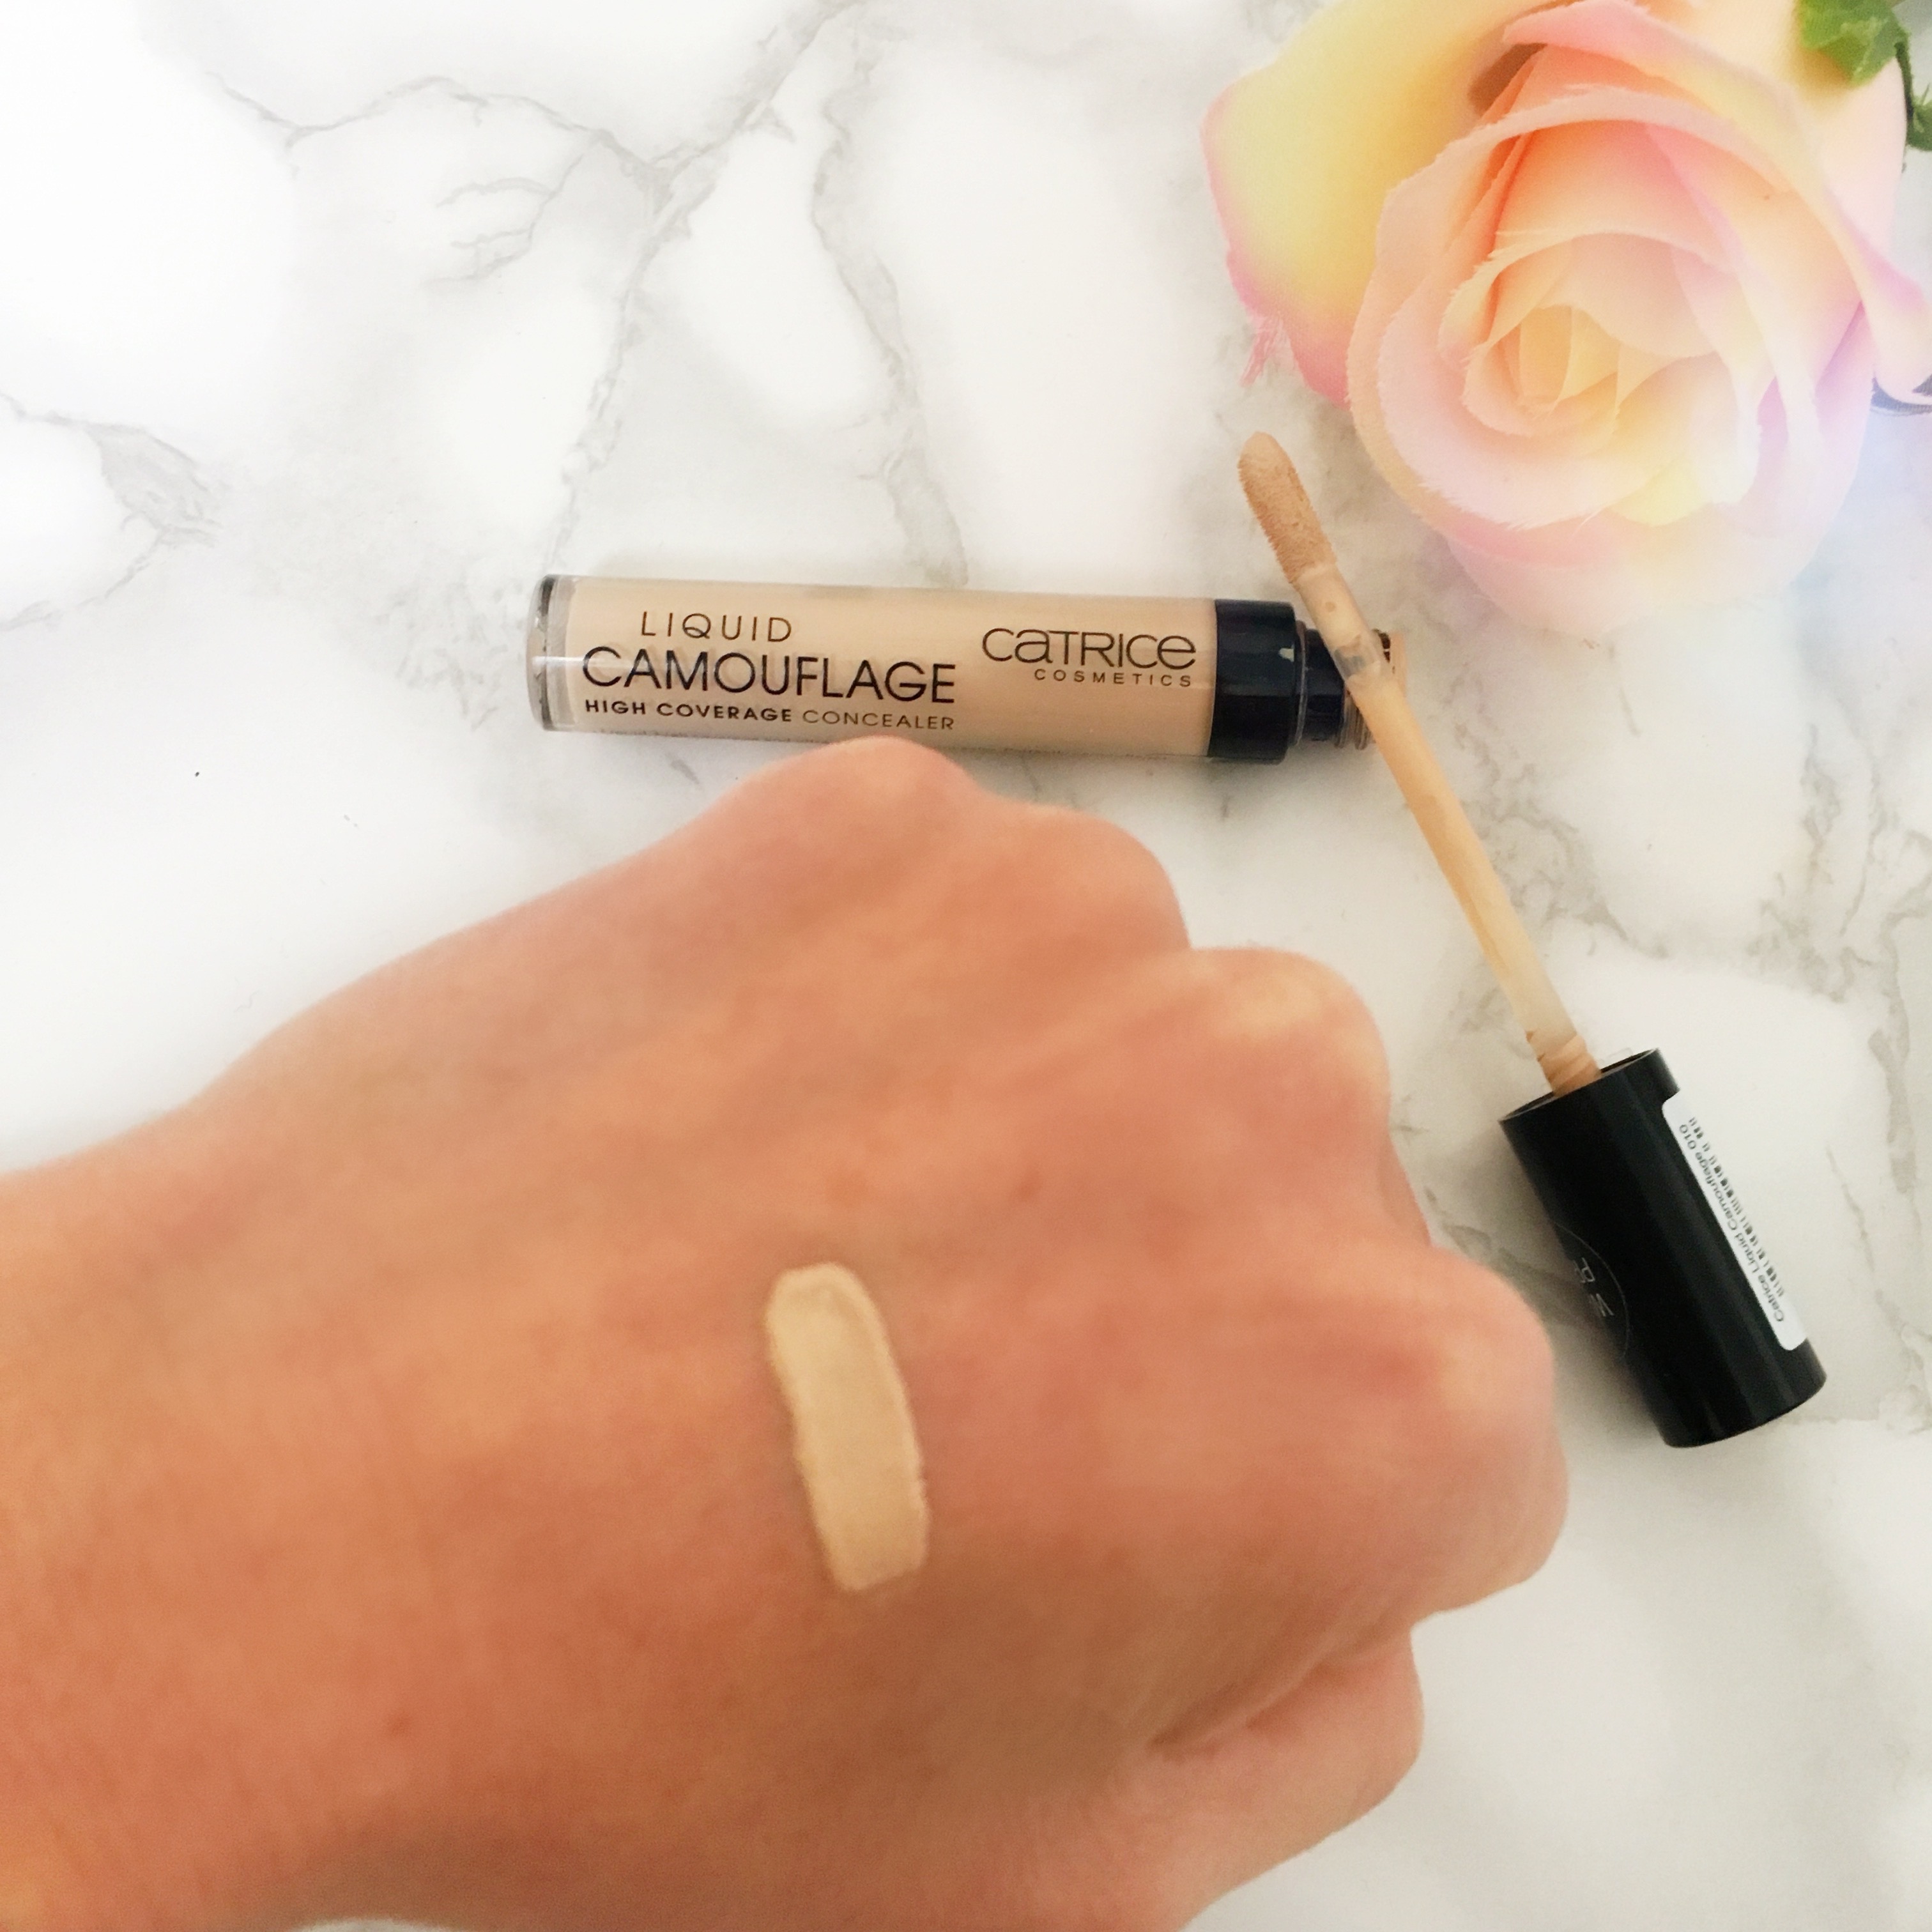 Columns Camouflage The Free by Concealer Cruelty Kari Catrice Liquid from -